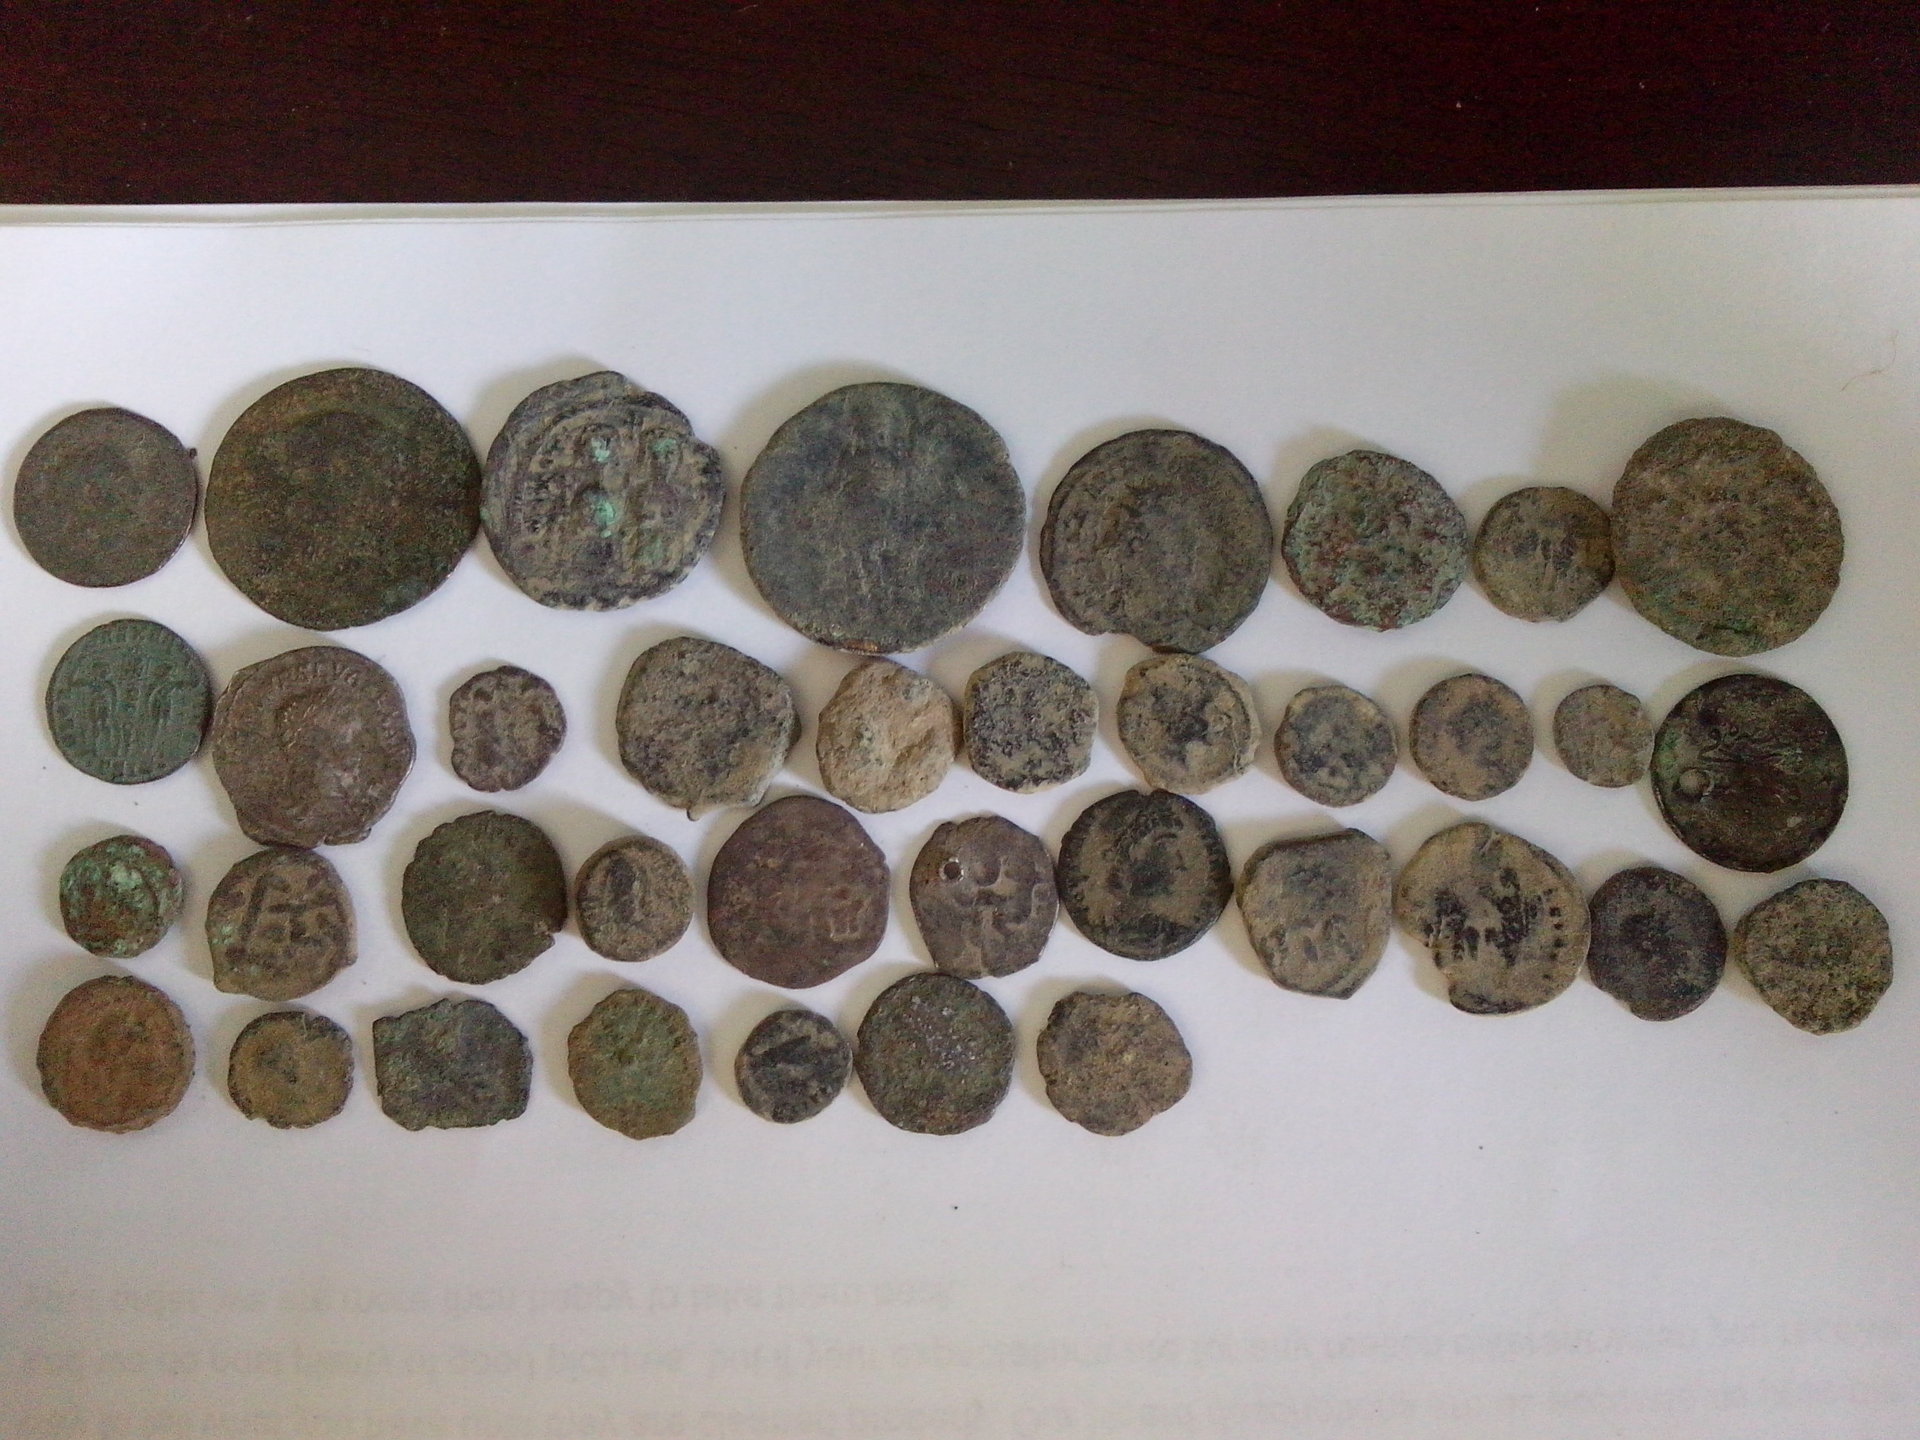 Some promising uncleaned ancients from Crusty Romans | Coin Talk